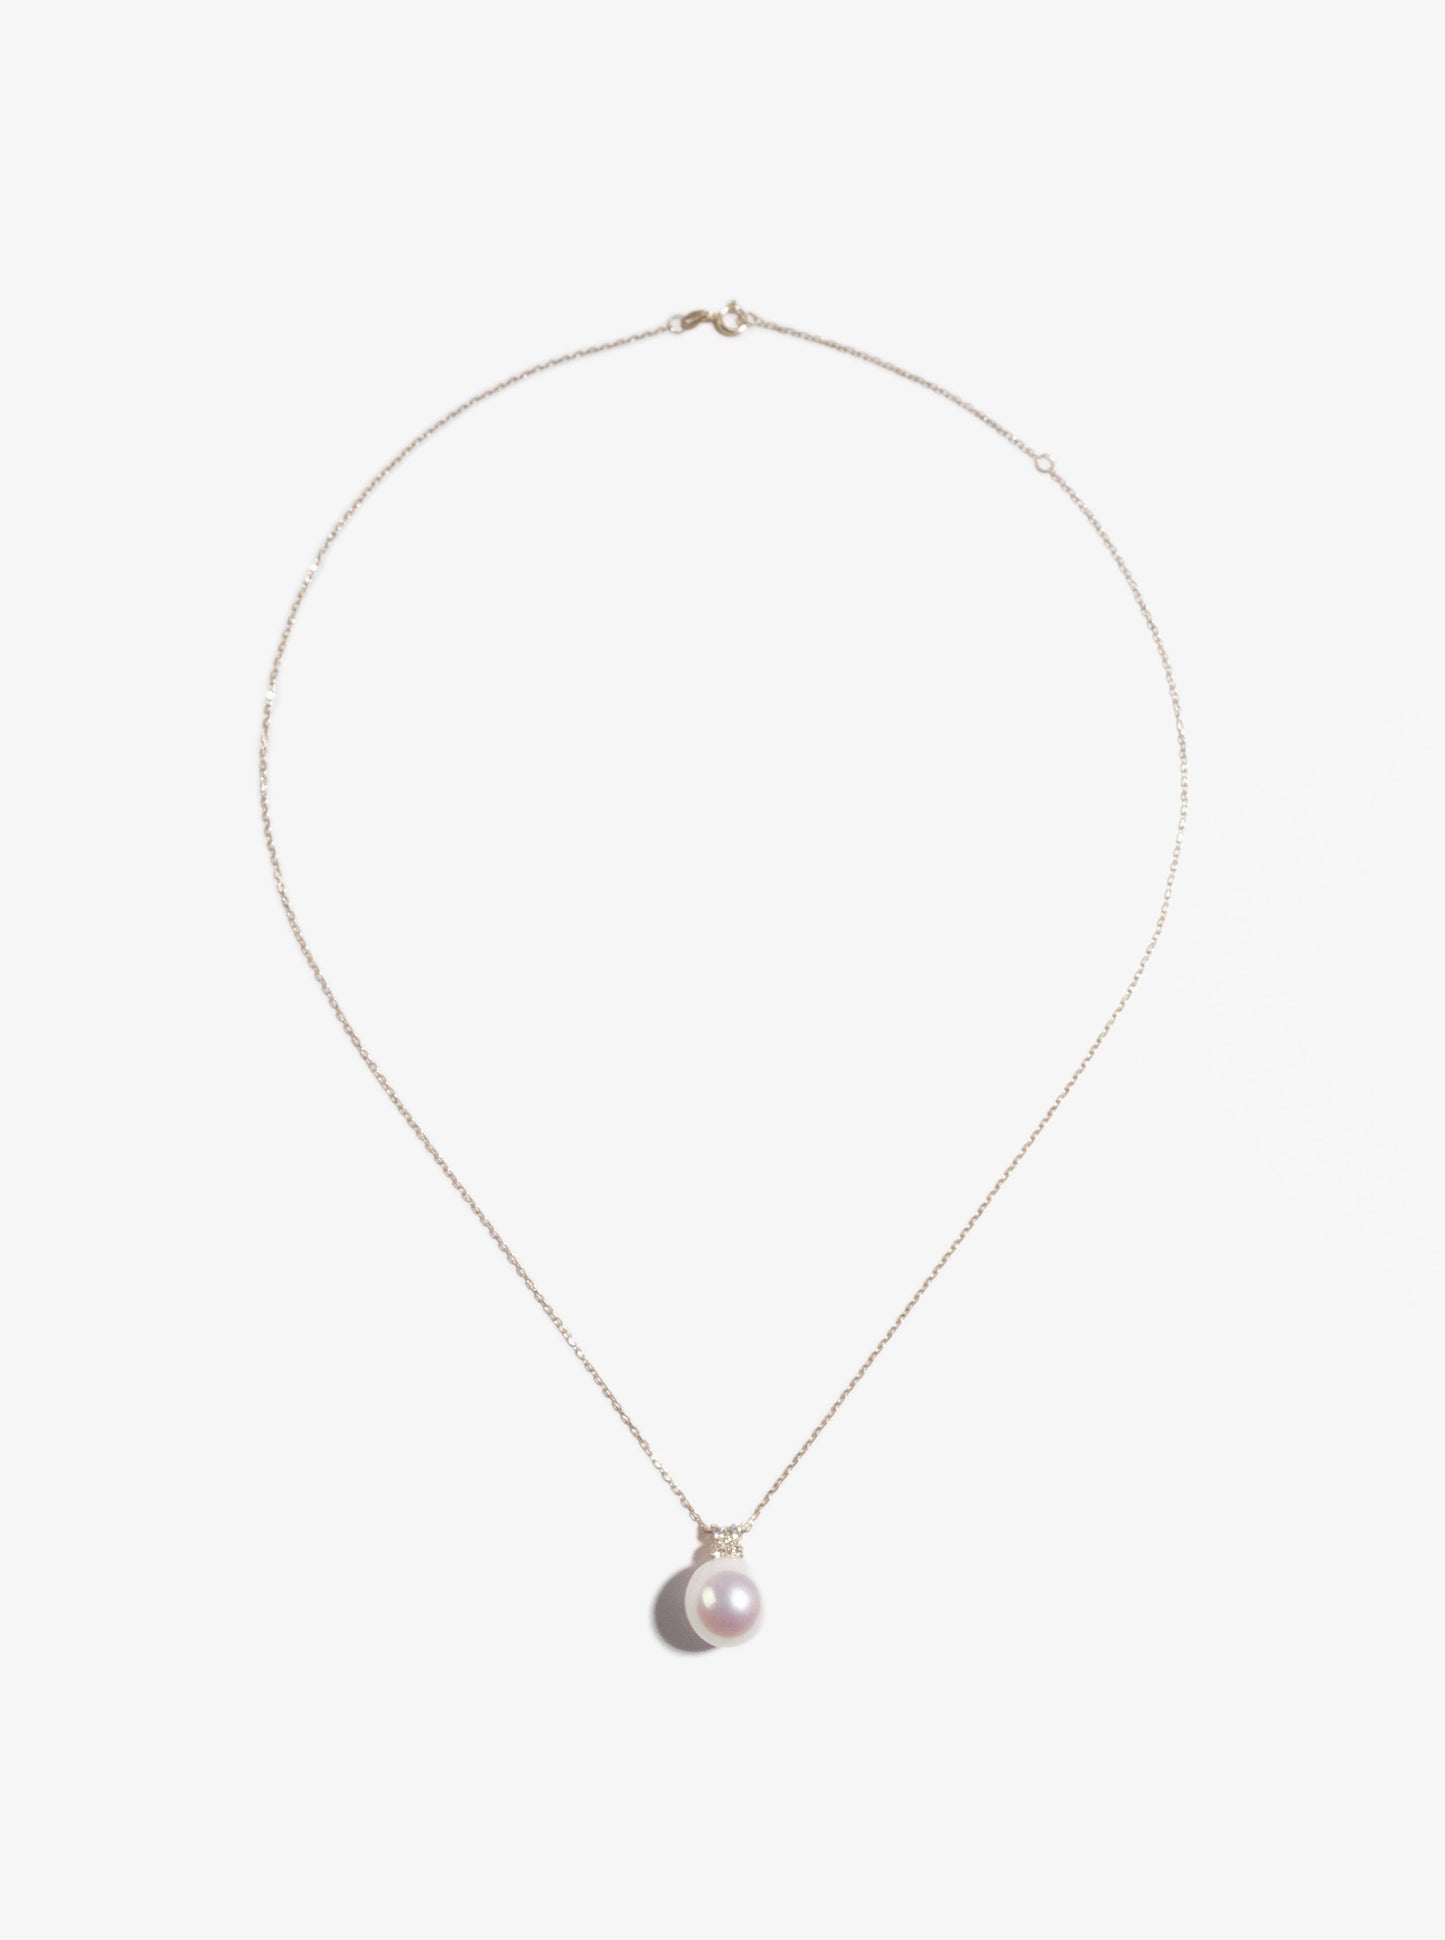 Freshwater Pearl Pendant With 18K Gold  FP18K16